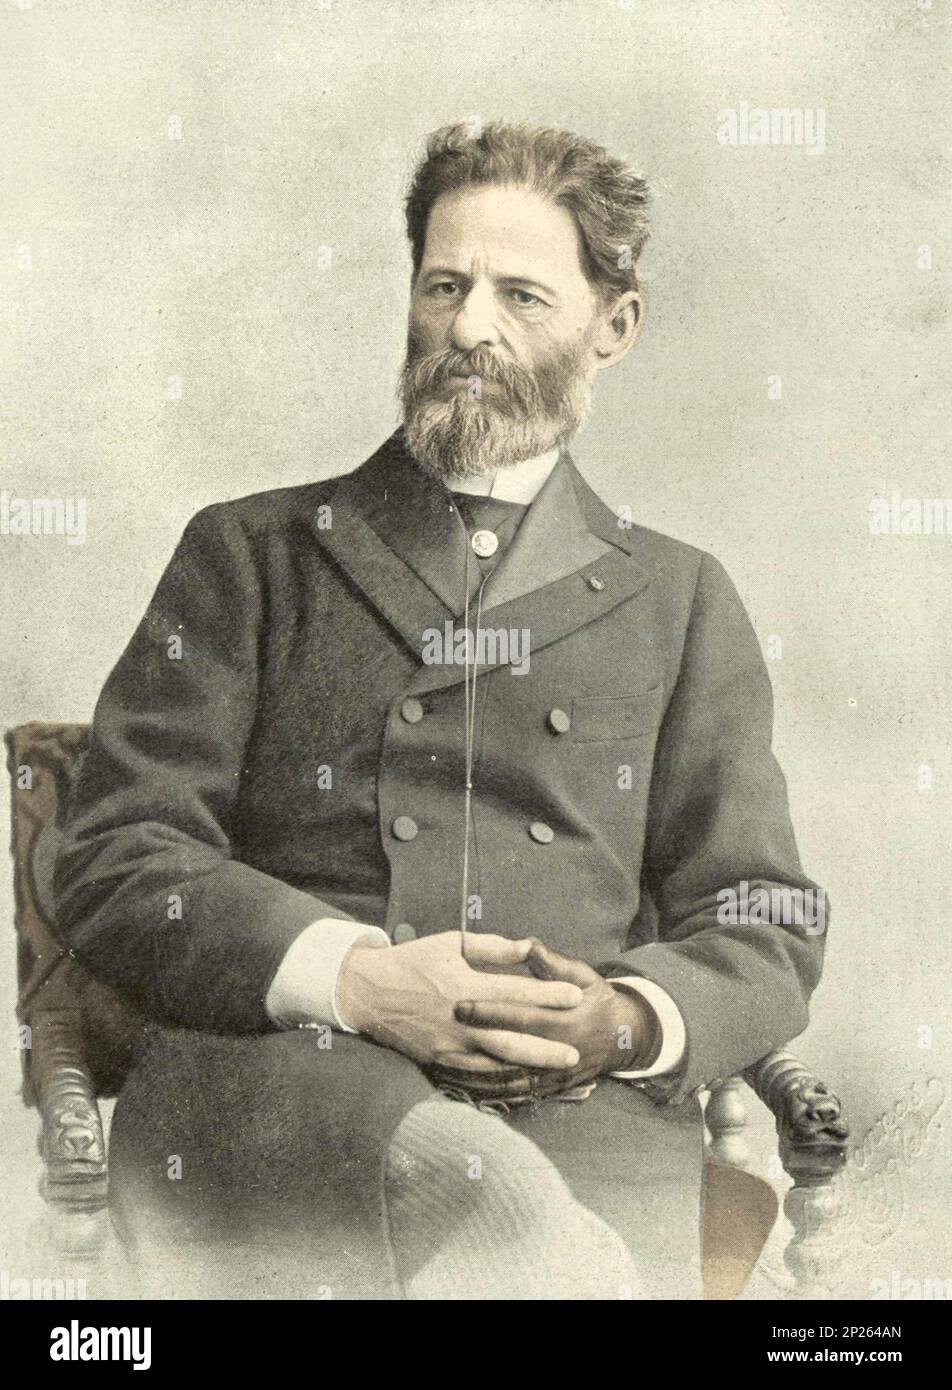 Photo portrait of Mark Antokolsky. Photo from 1902. Mark Matveyevich Antokolsky (1840 – 1902) was a Russian Imperial sculptor of Lithuanian Jewish descent. Stock Photo